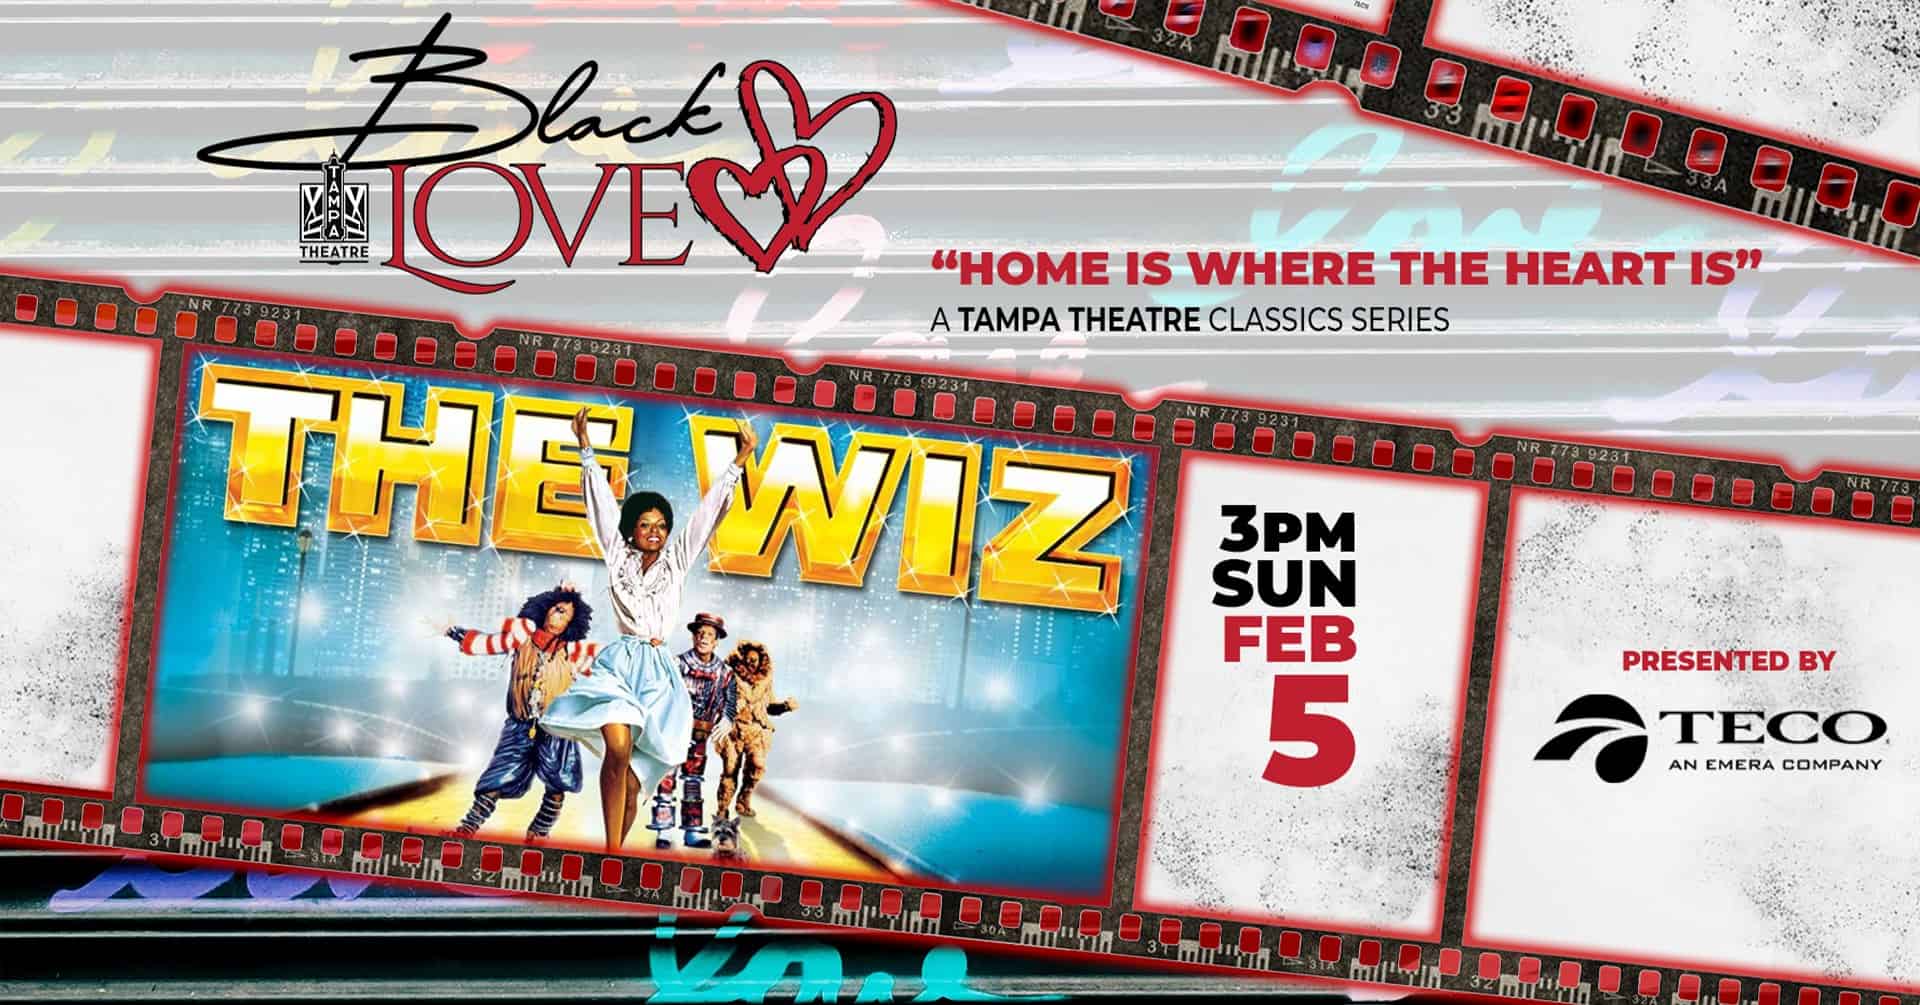 The Wiz at Tampa Theatre